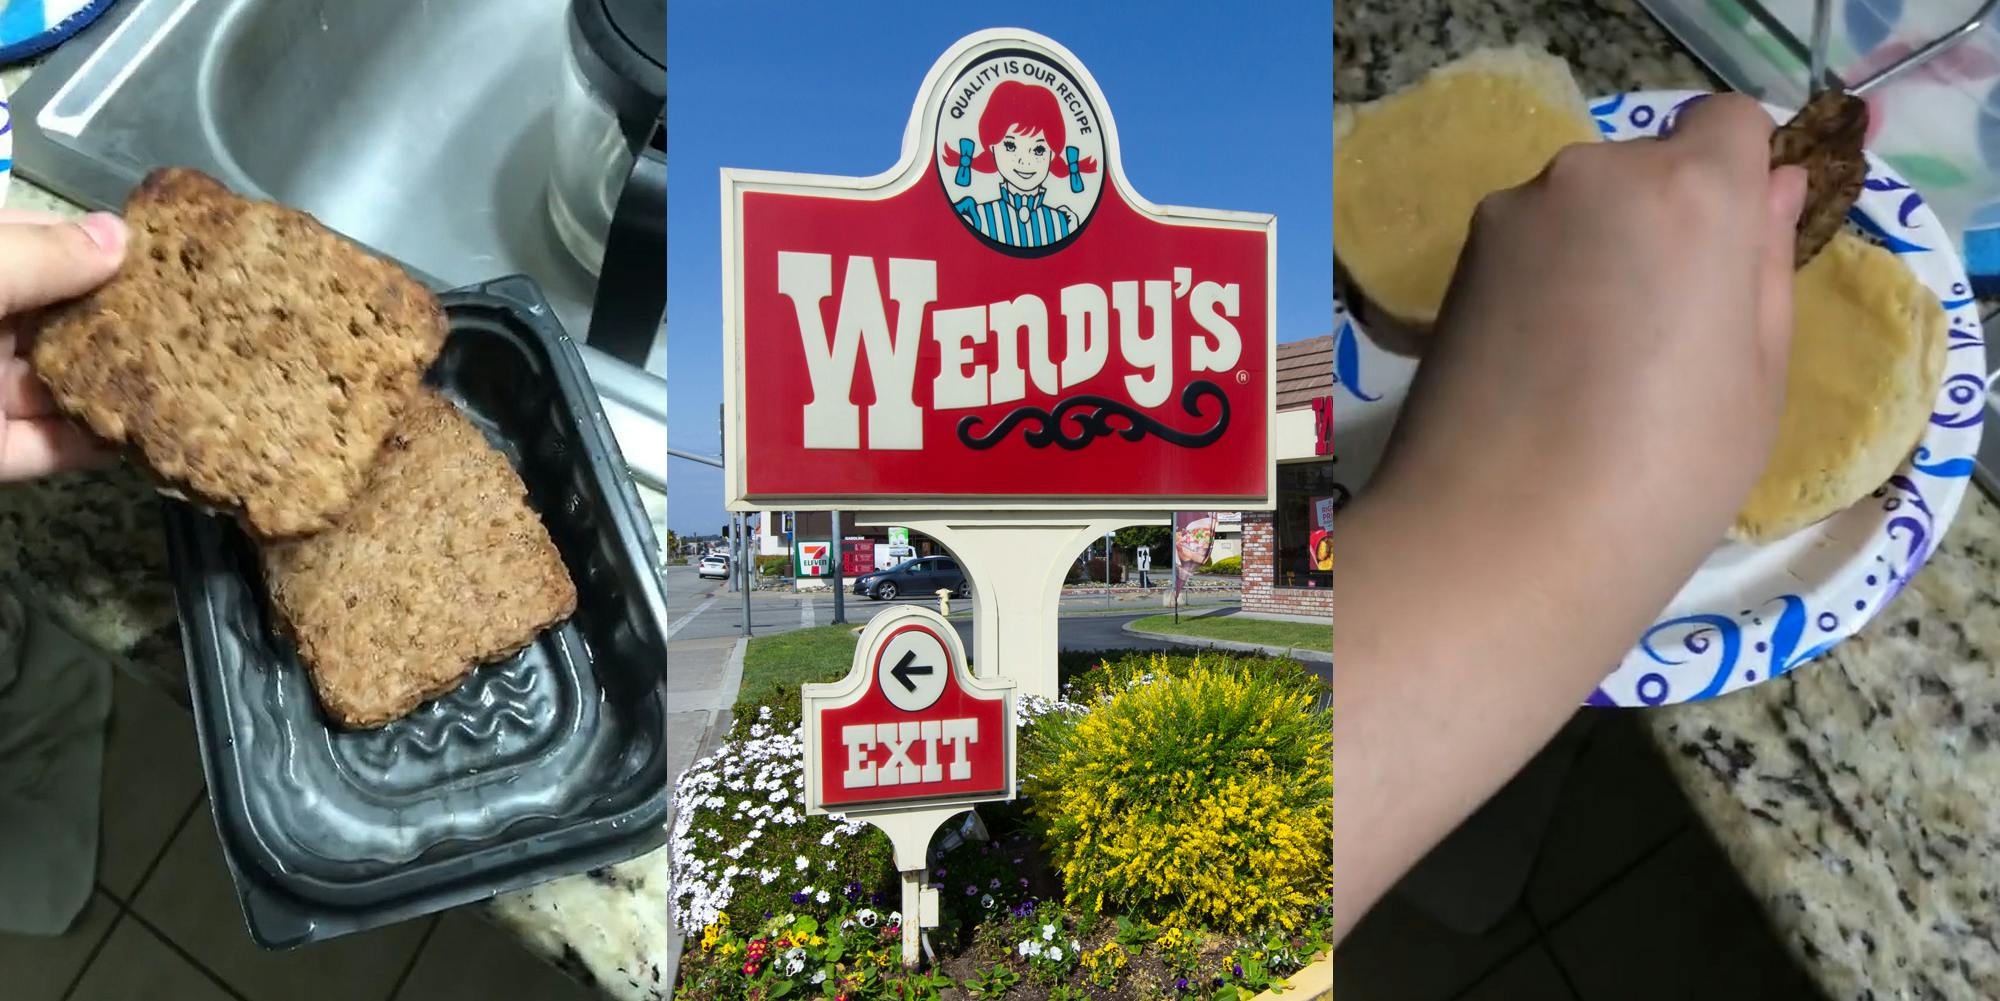 hand holding one of 2 beef patties from Wendy's over black and clear container (l) Wendy's sign outside of restaurant (c) person placing Wendy's burger on bun on paper plate (r)